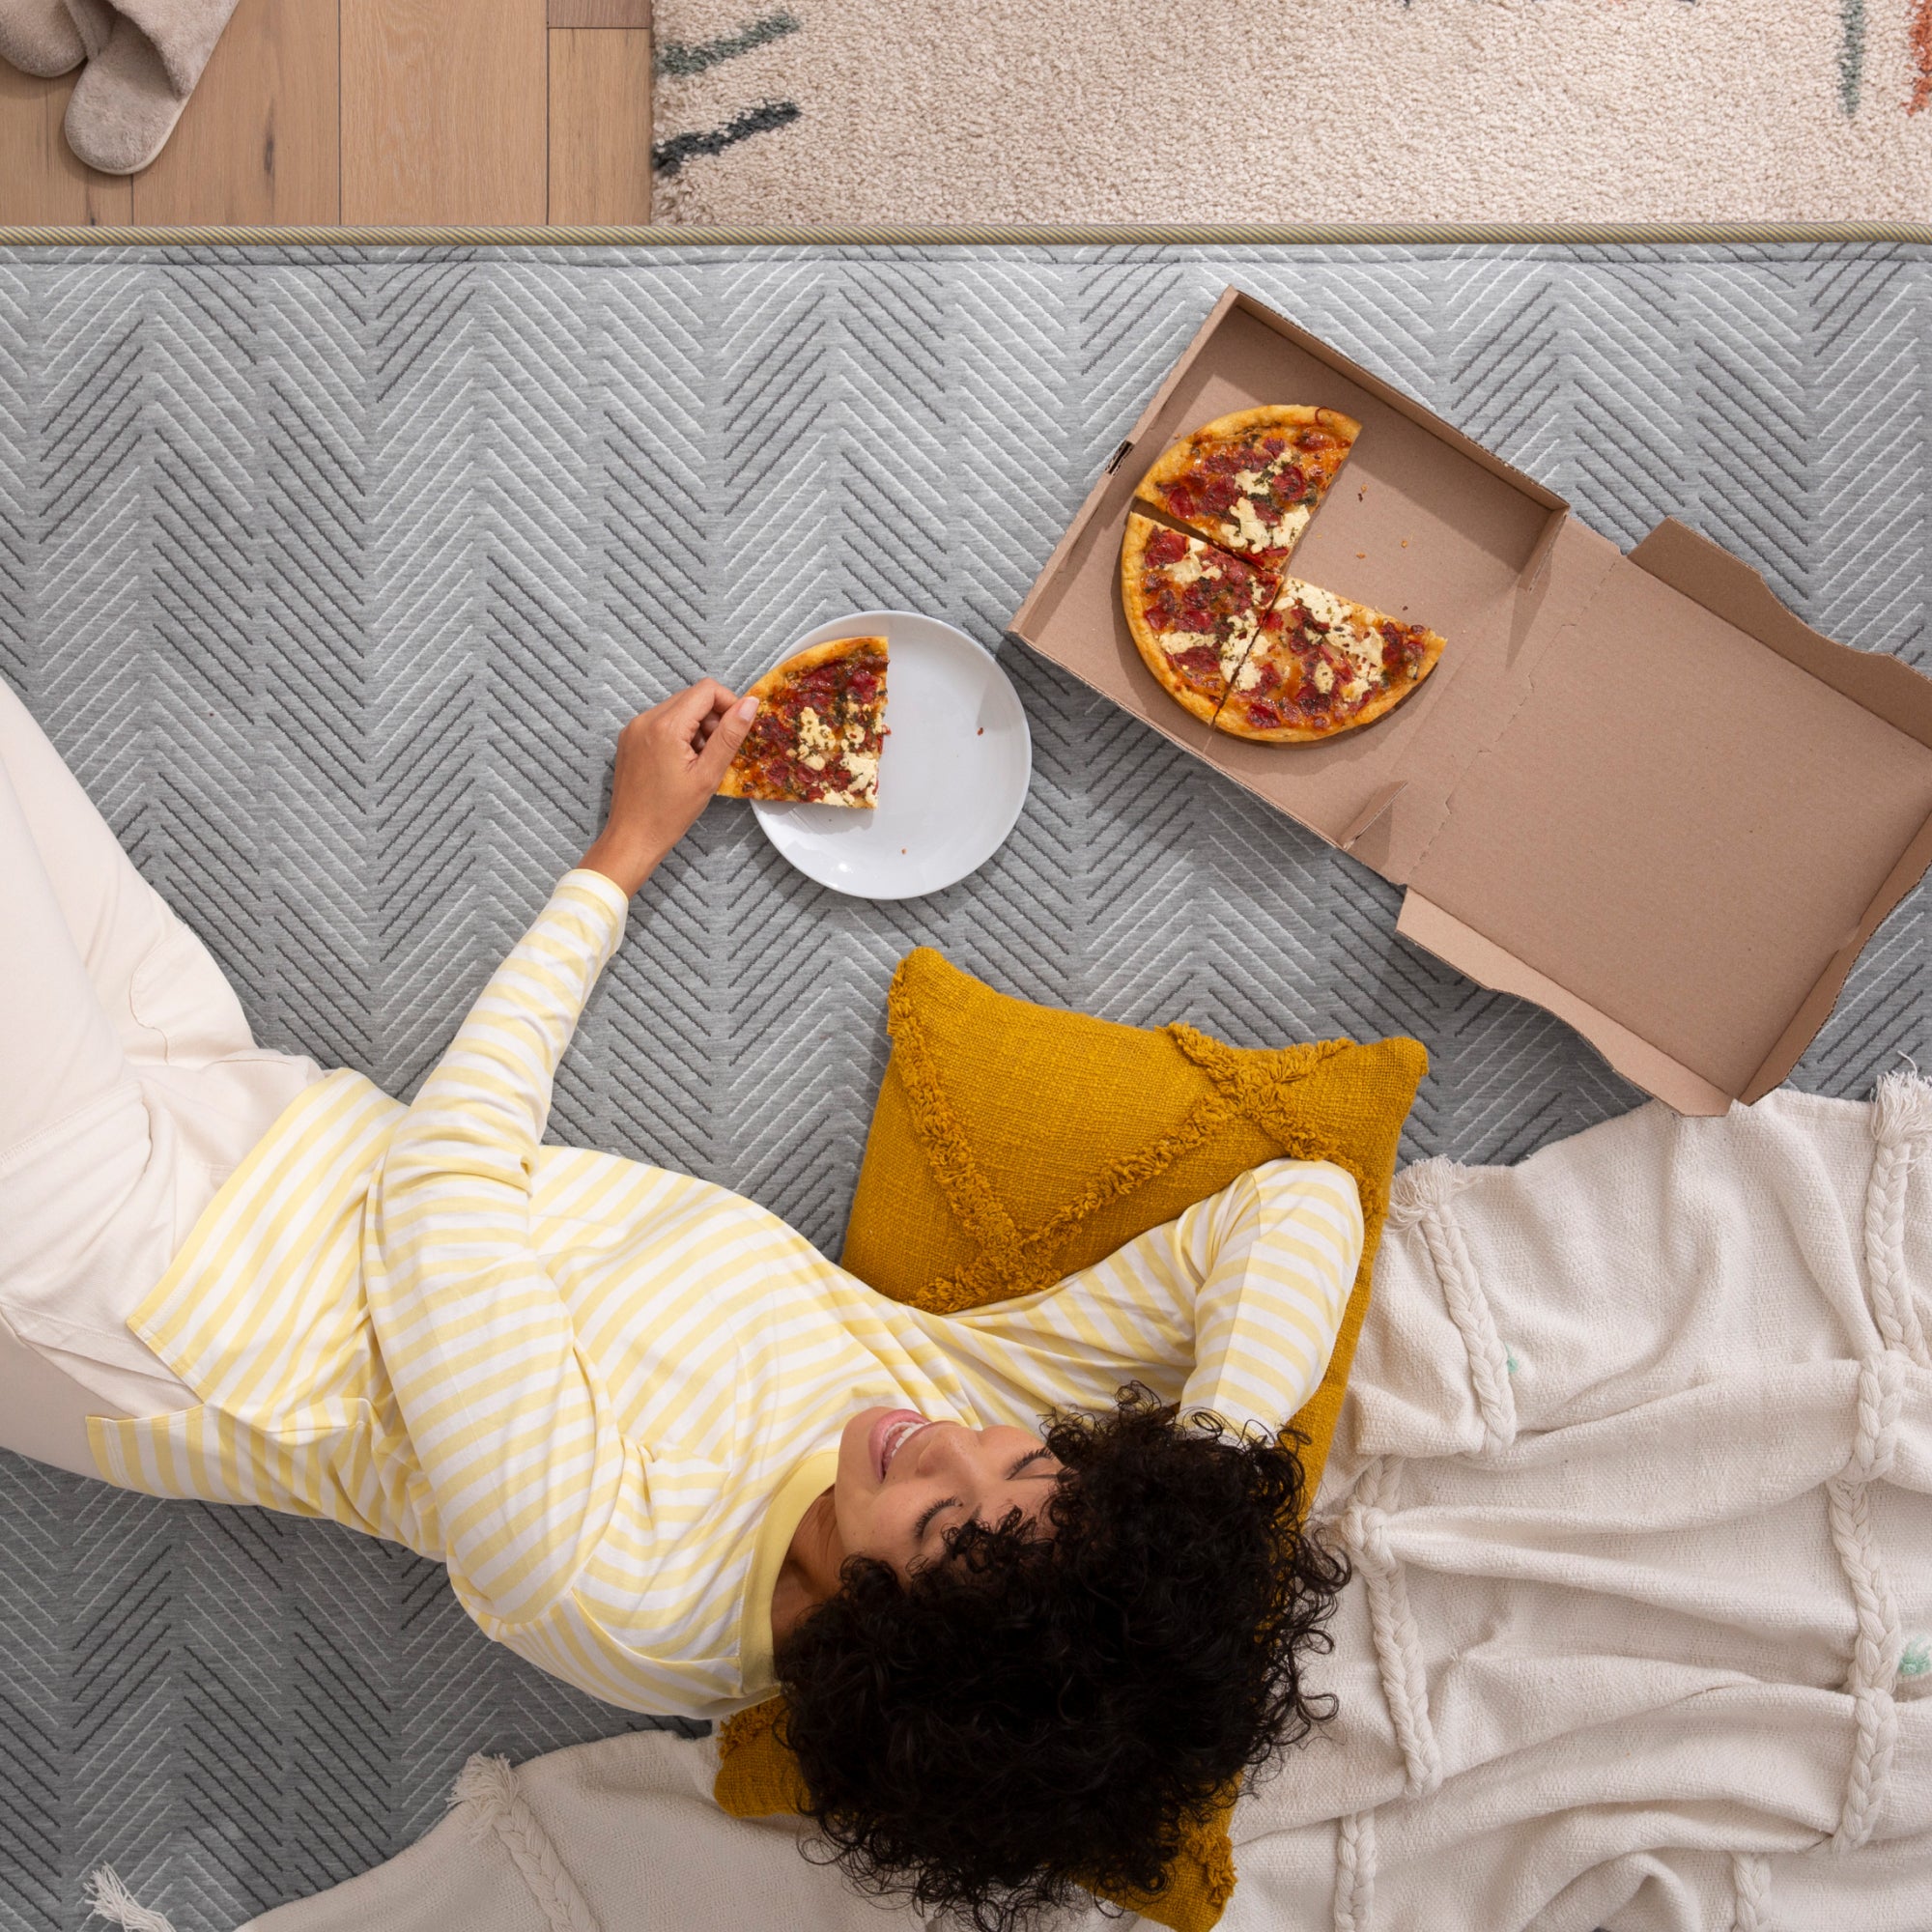 Woman eating pizza on Hybrid Firm Mattress